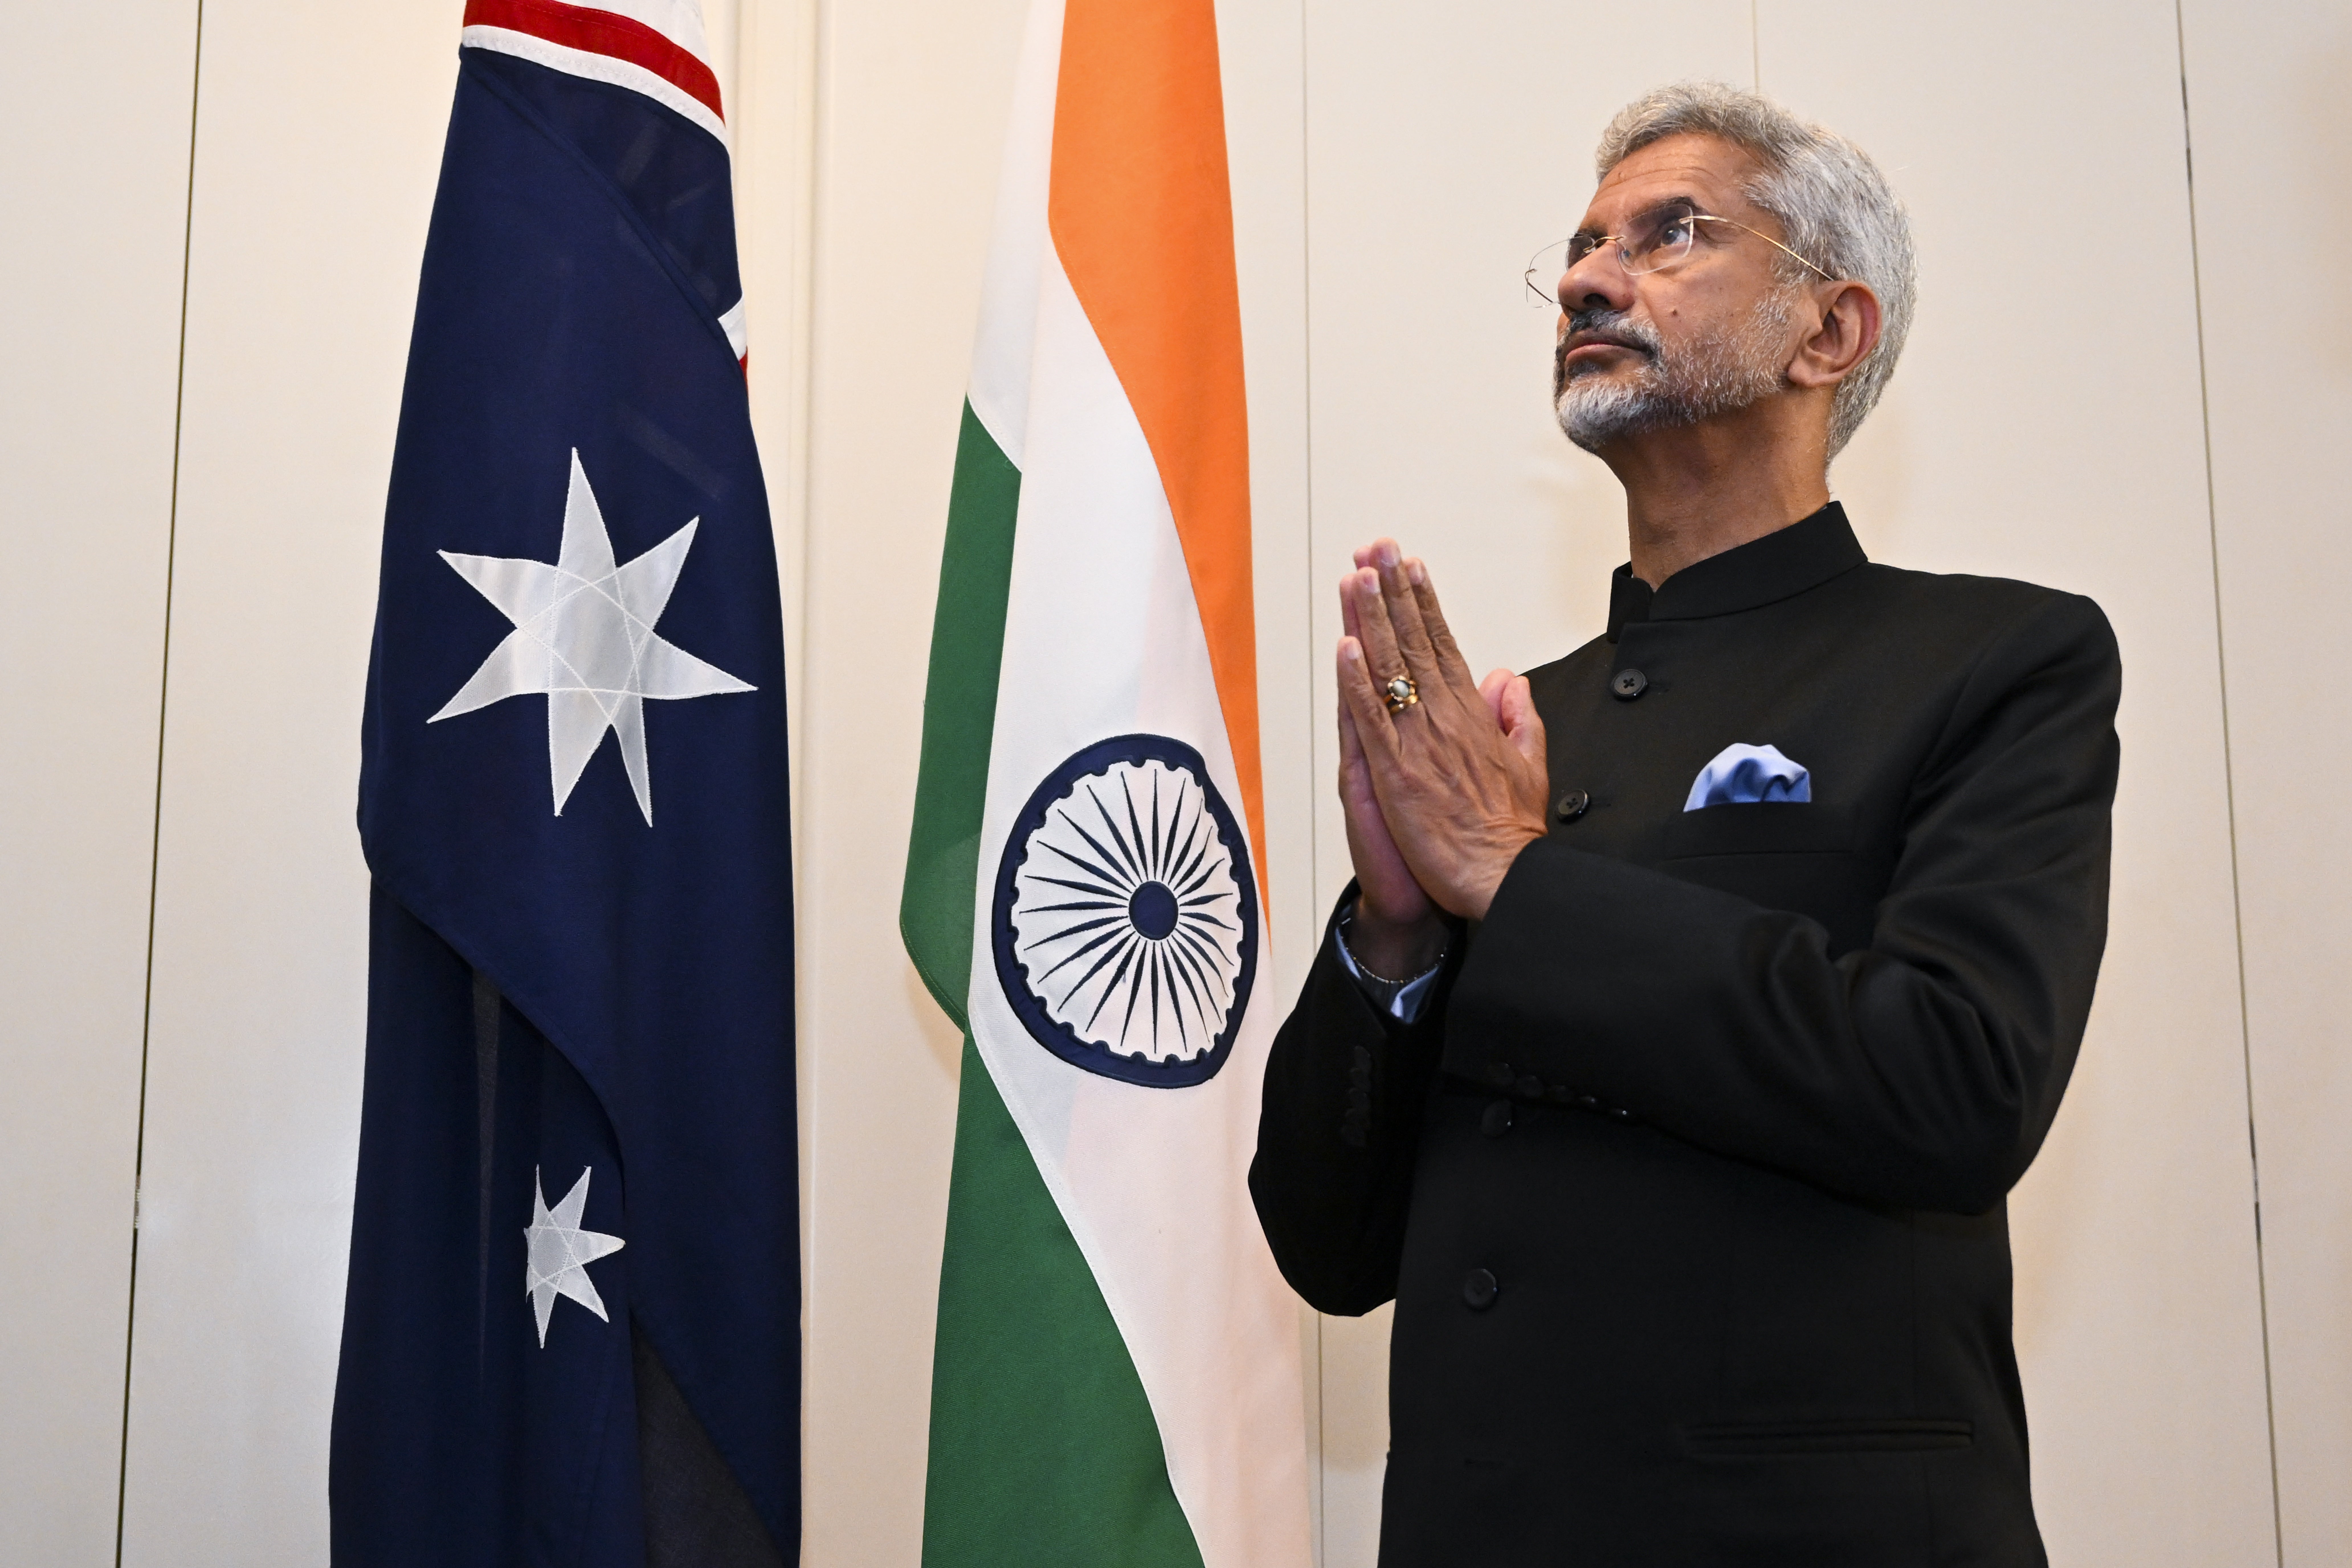 India’s external affairs minister Dr S Jaishankar before meeting Australian foreign minister Penny Wong ahead of a bilateral meeting at Parliament House in Canberra